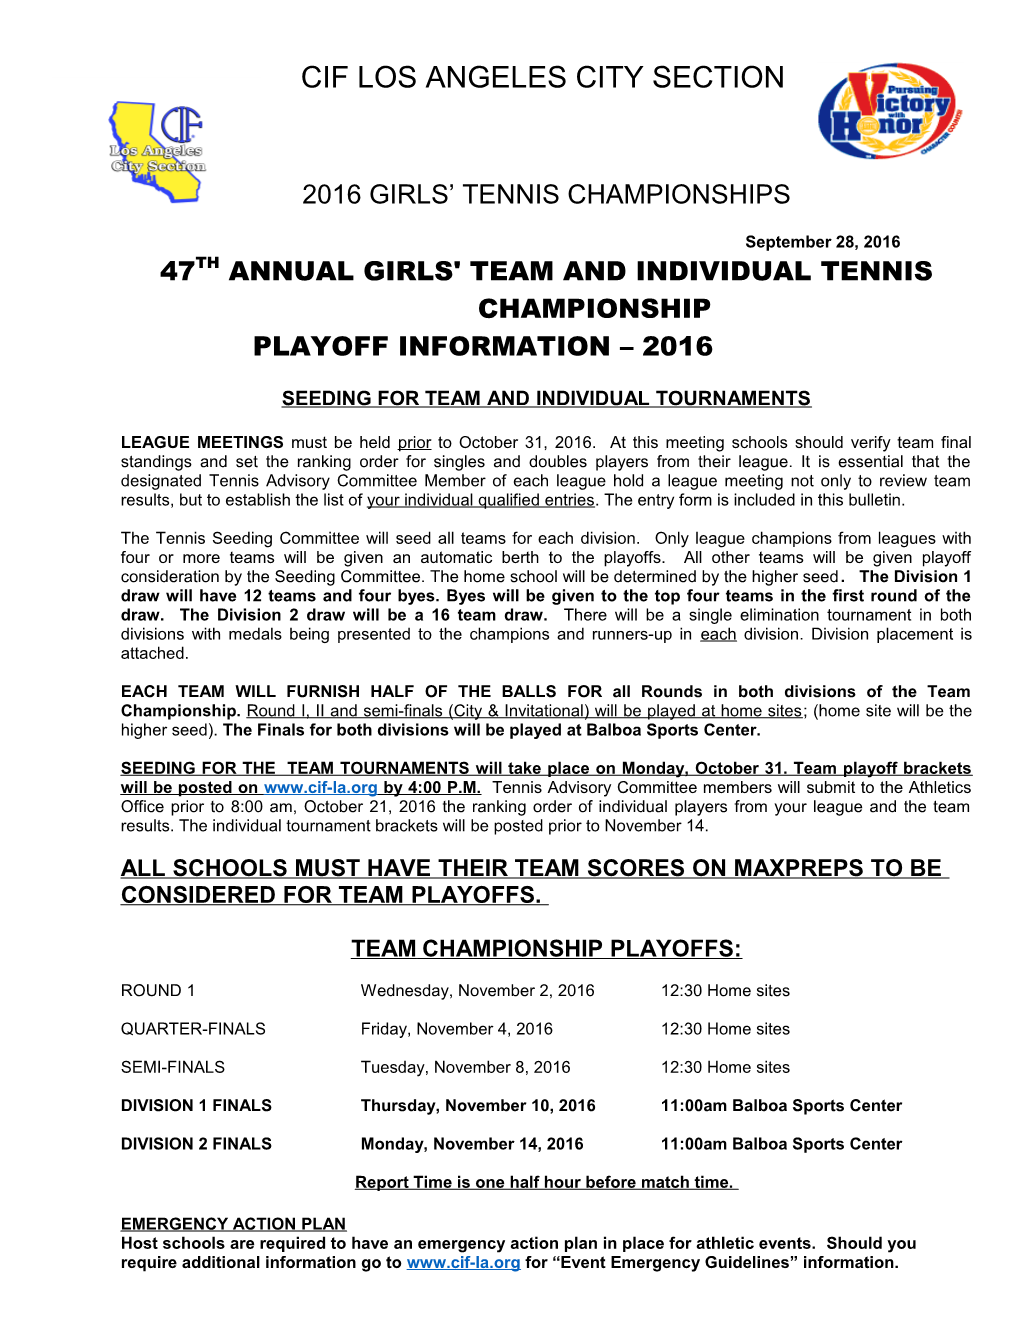 47Th Annual Girls' Team and Individual Tennis Championship